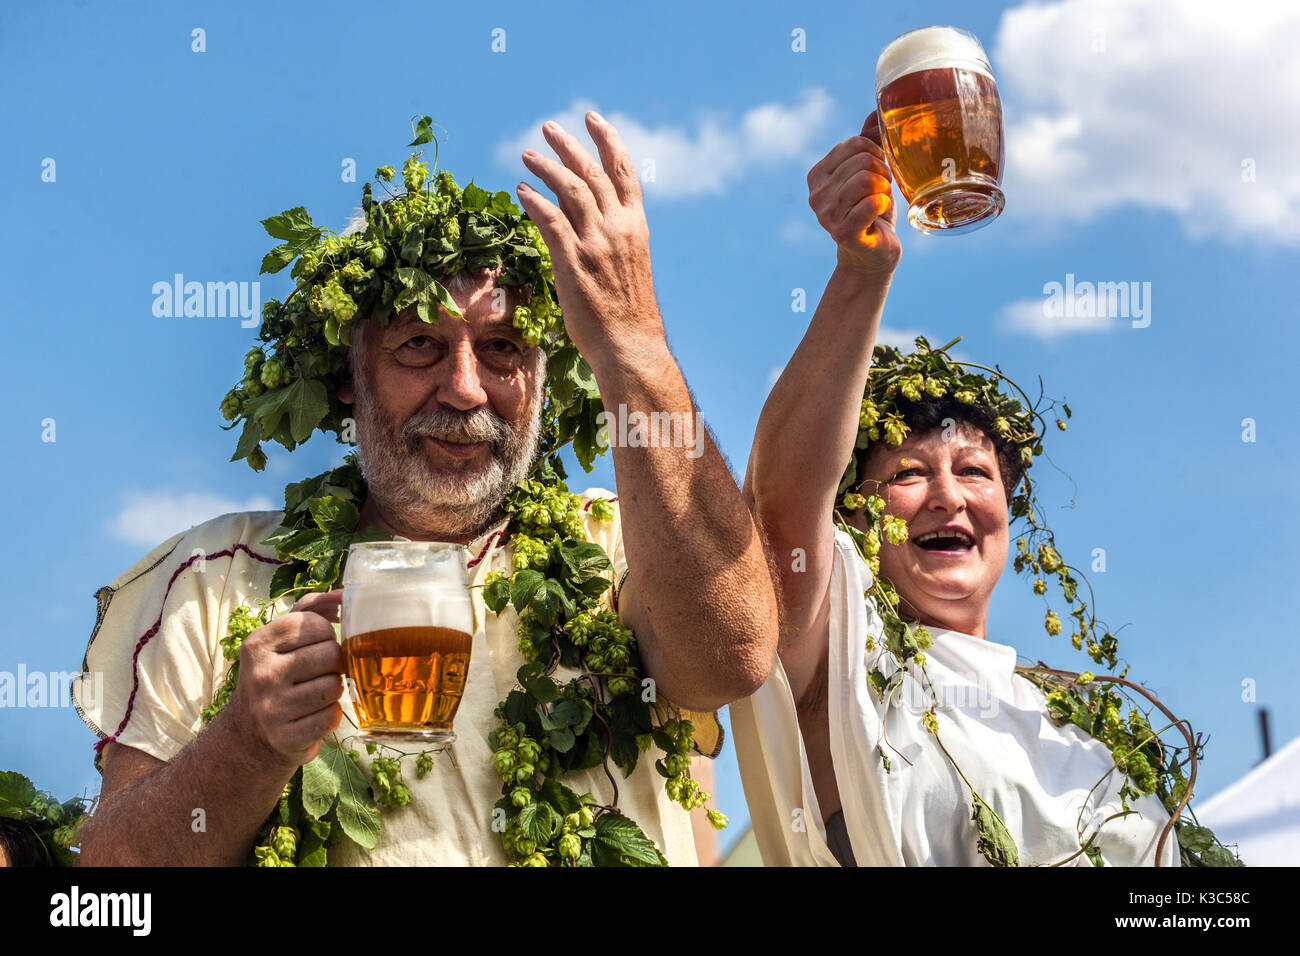 Czech beer festival Man Woman Seniors enjoying summer People celebrate Decorated Hop Wreath Cheers Rising Hands with a glass of beer Czech Republic Stock Photo